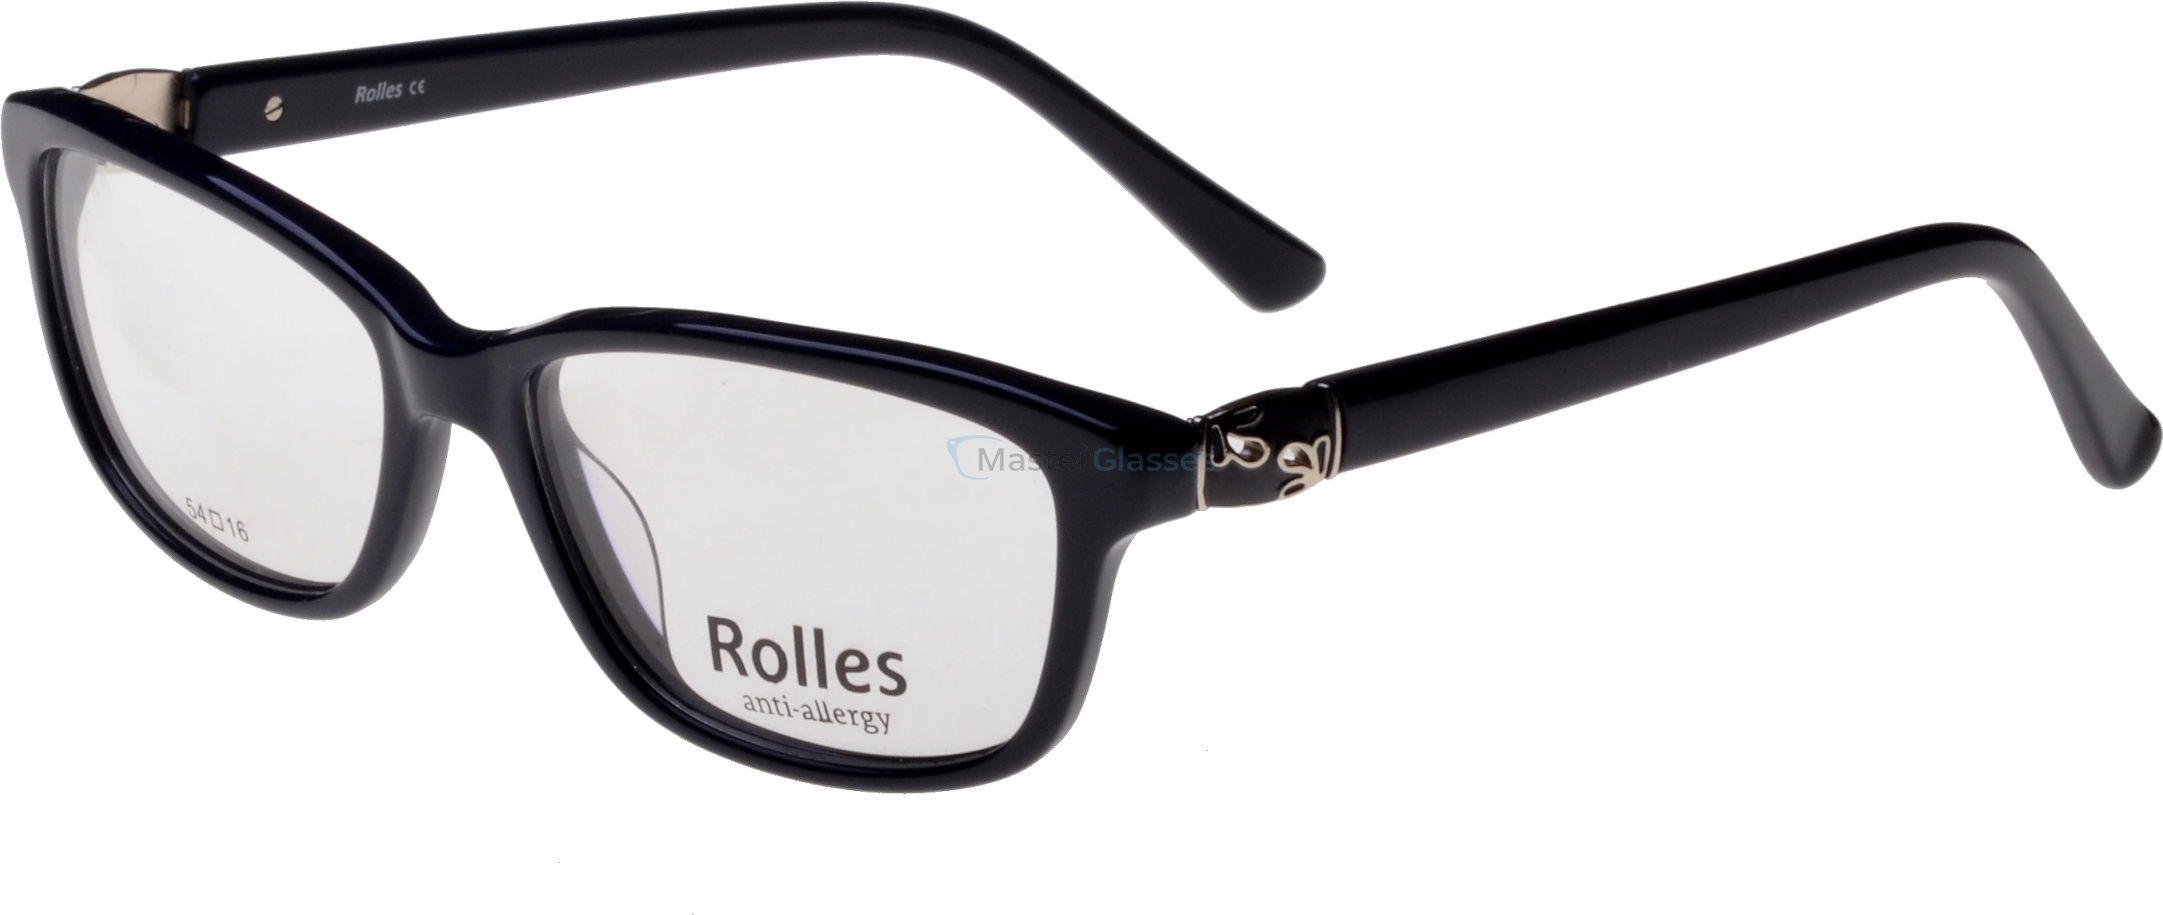  Rolles 410 03